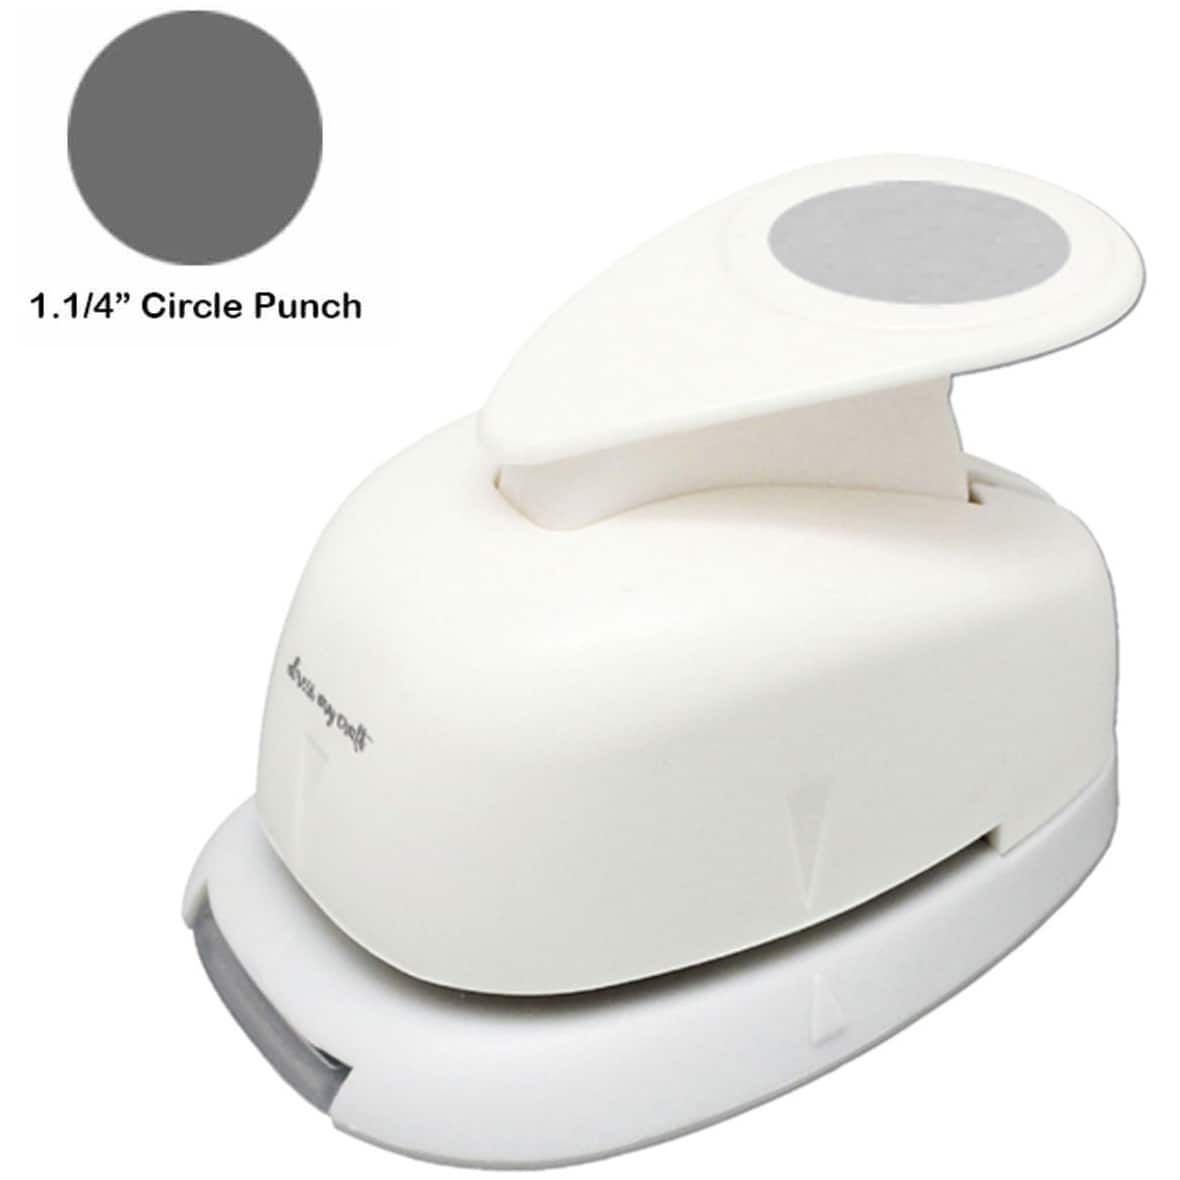 UCEC Paper Punch, 3 Inch Circle Punch Large Hole Punch Paper